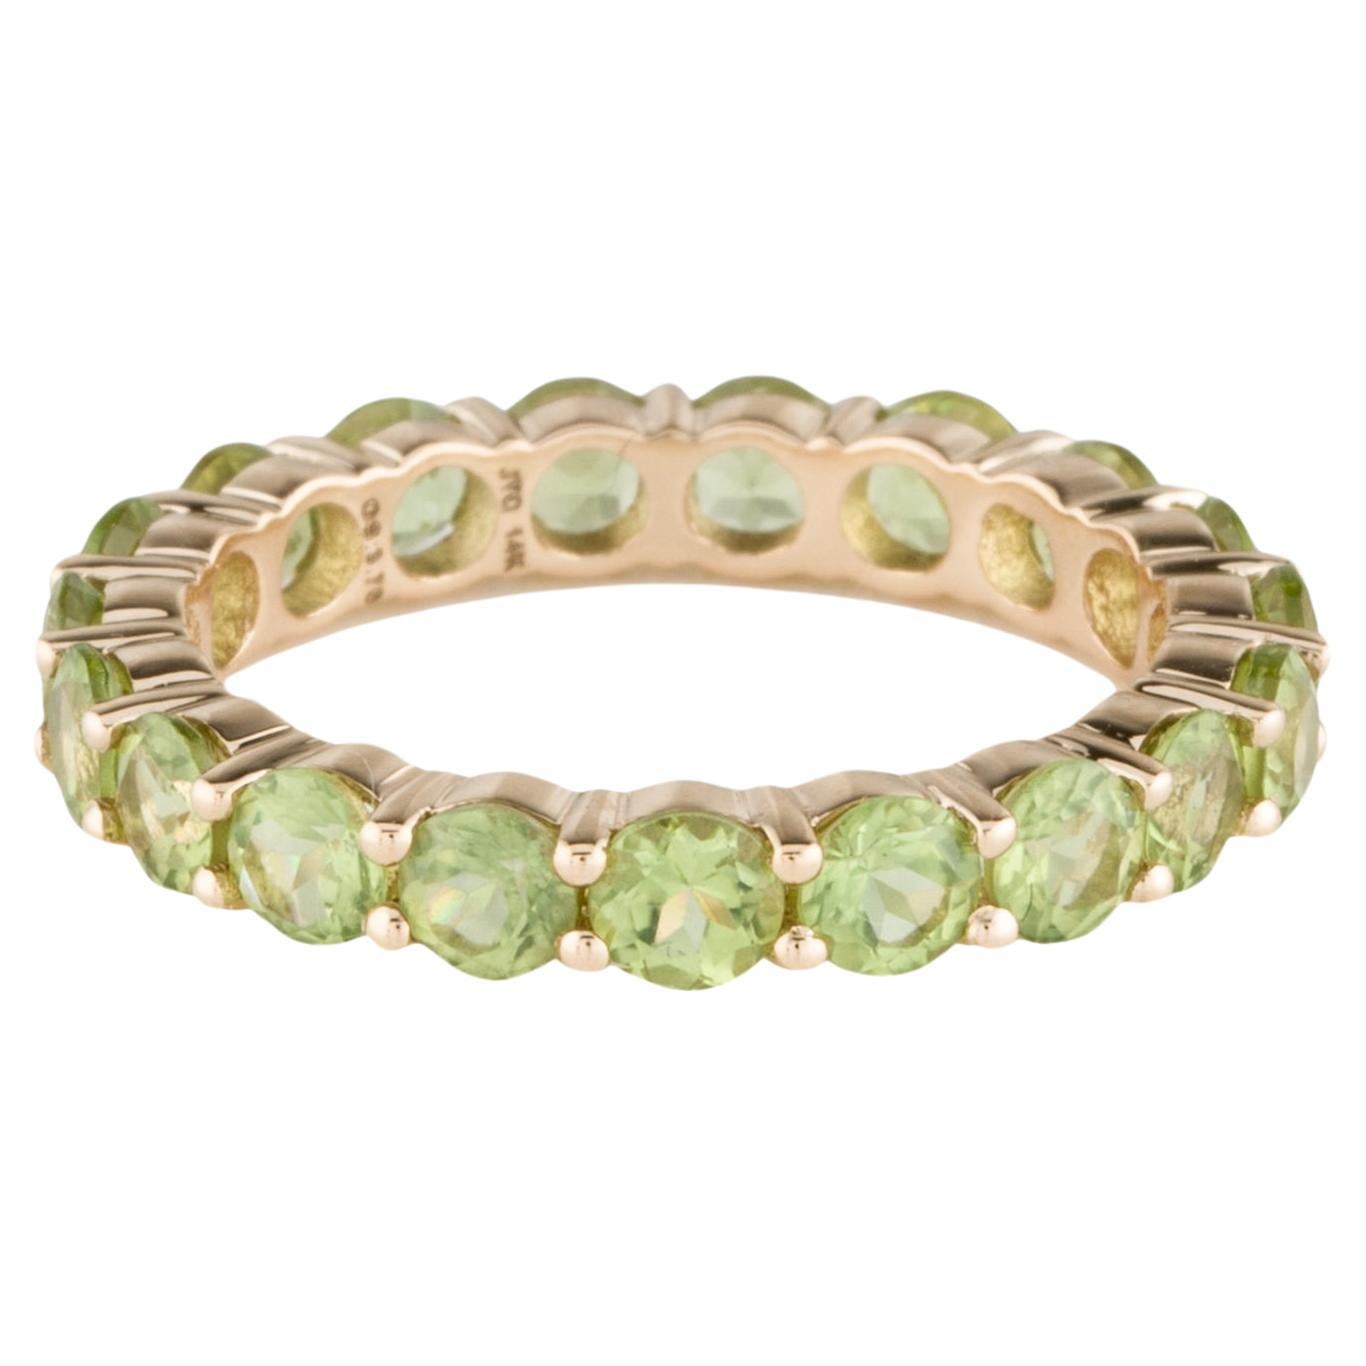  Elegant 14K Yellow Gold Peridot Eternity Band with Faceted Round Peridots For Sale